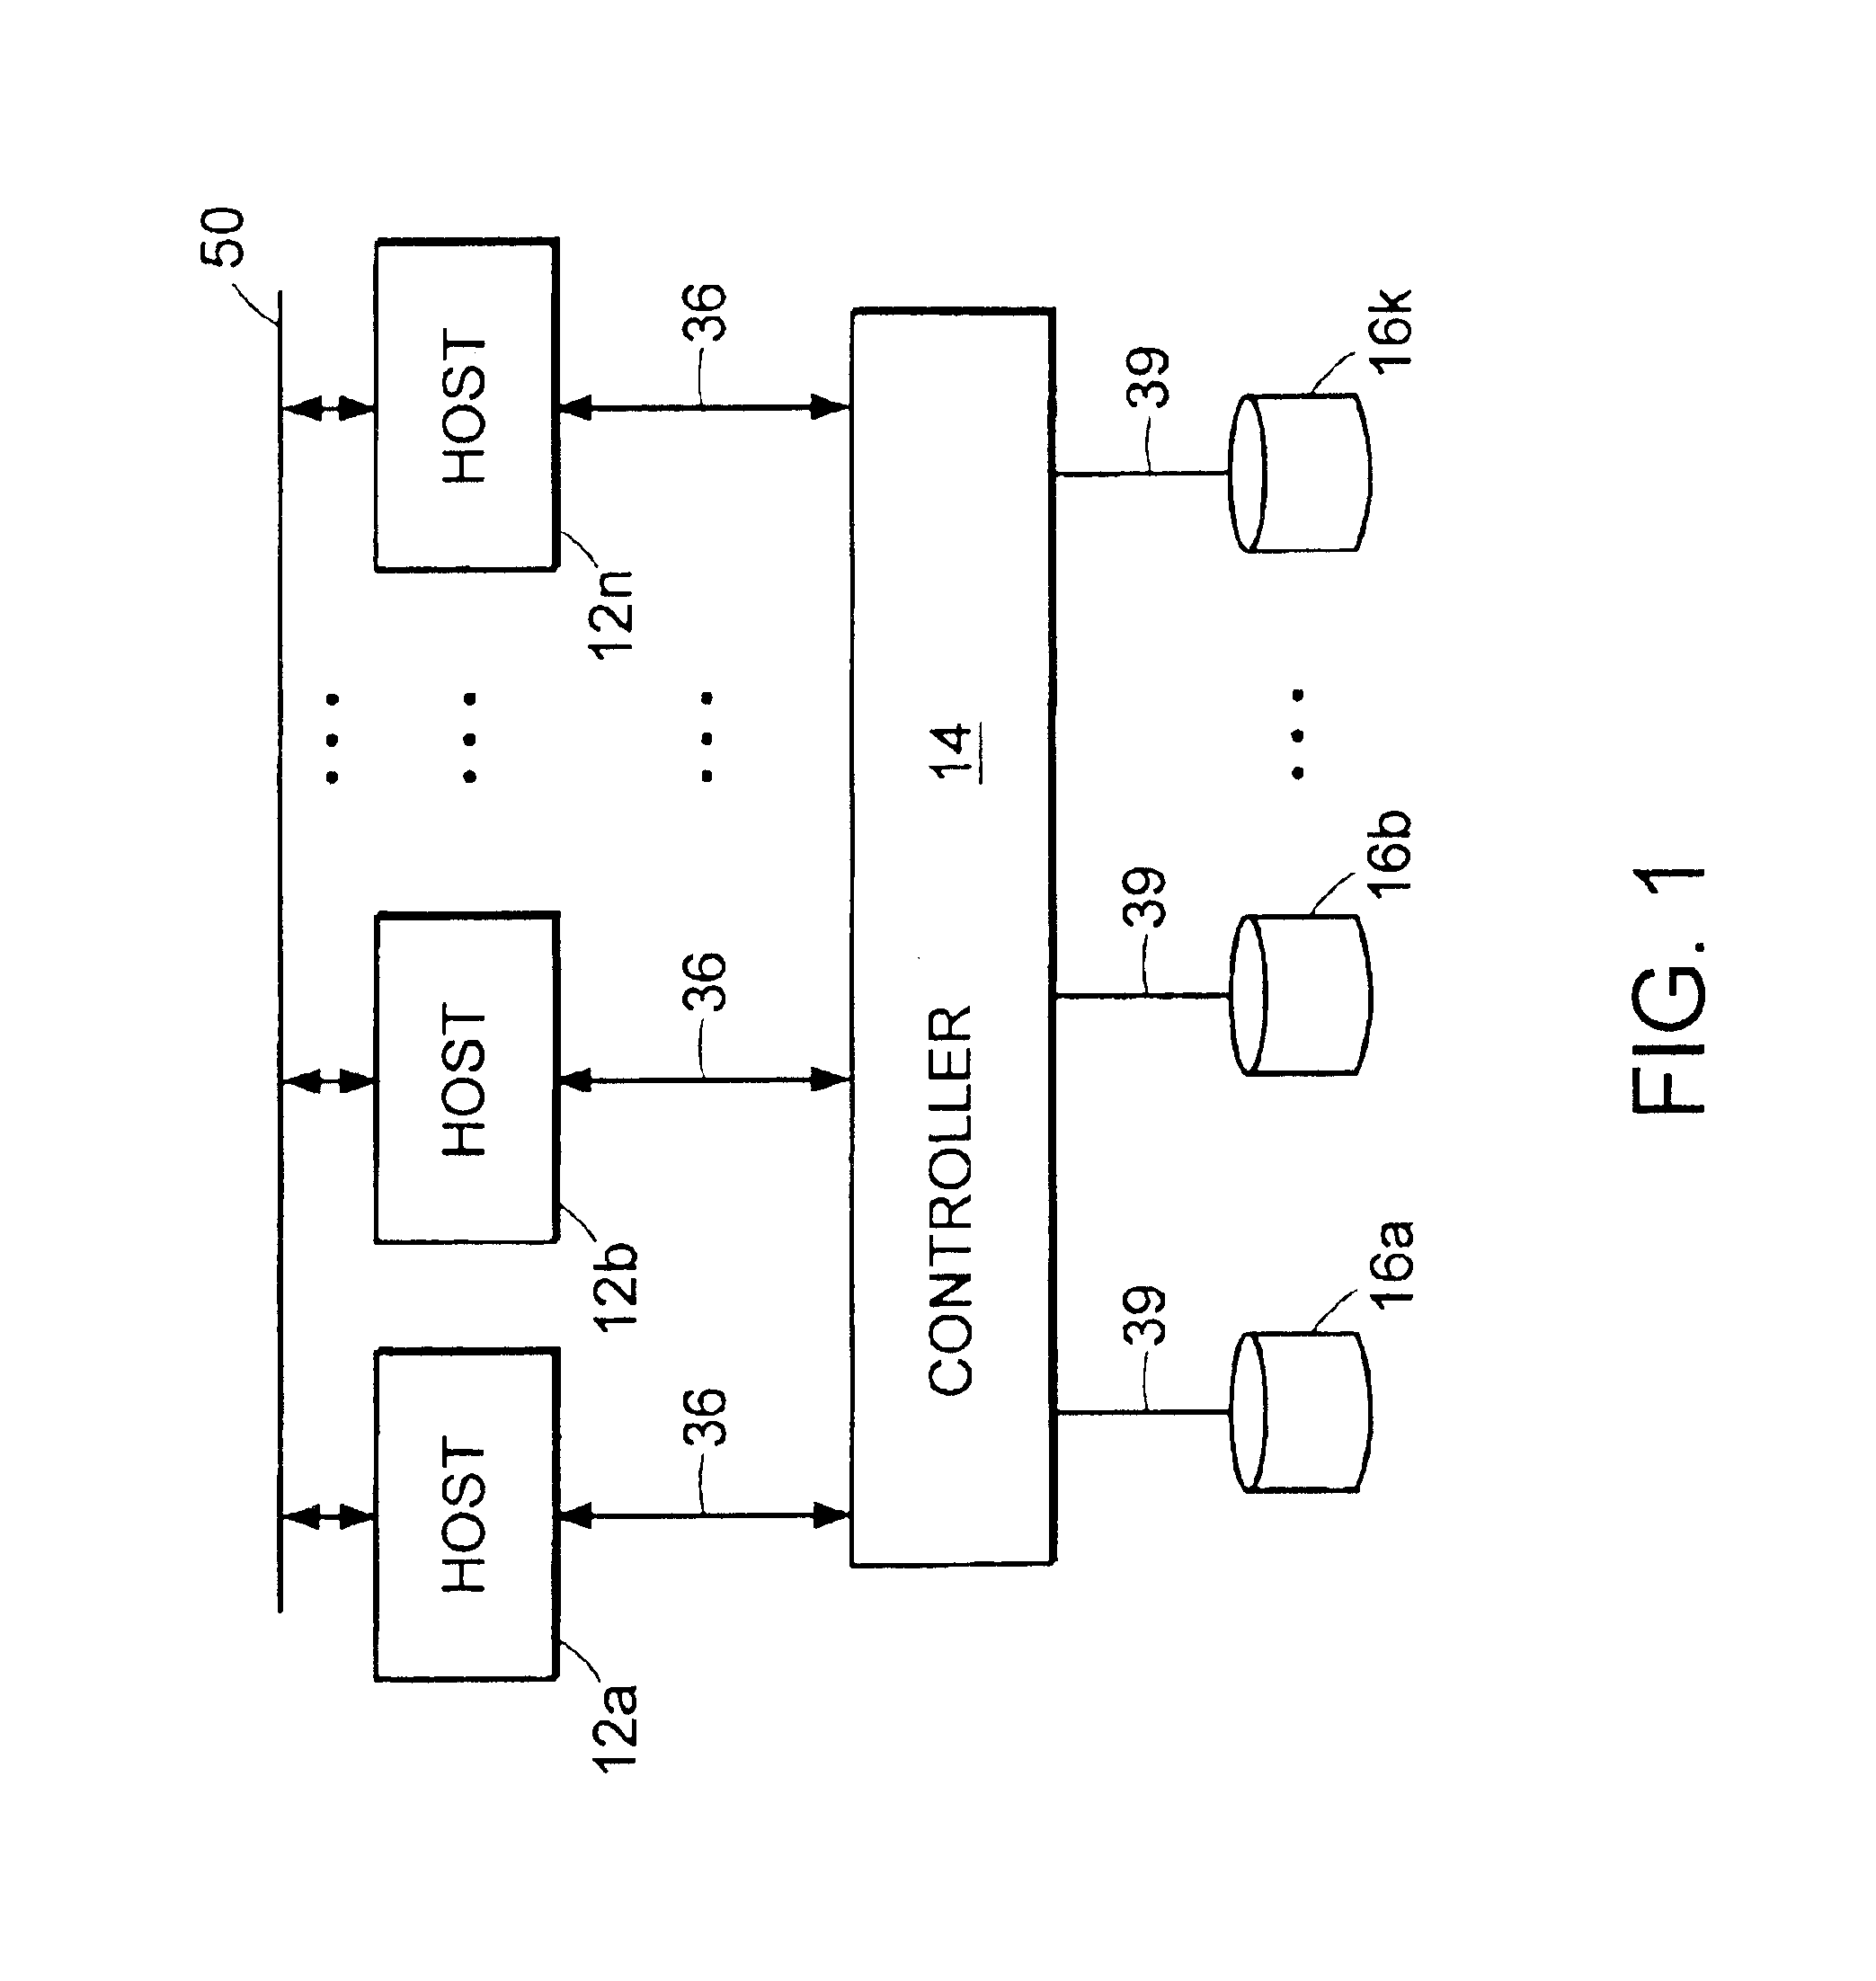 Graphical user input interface for testing performance of a mass storage system